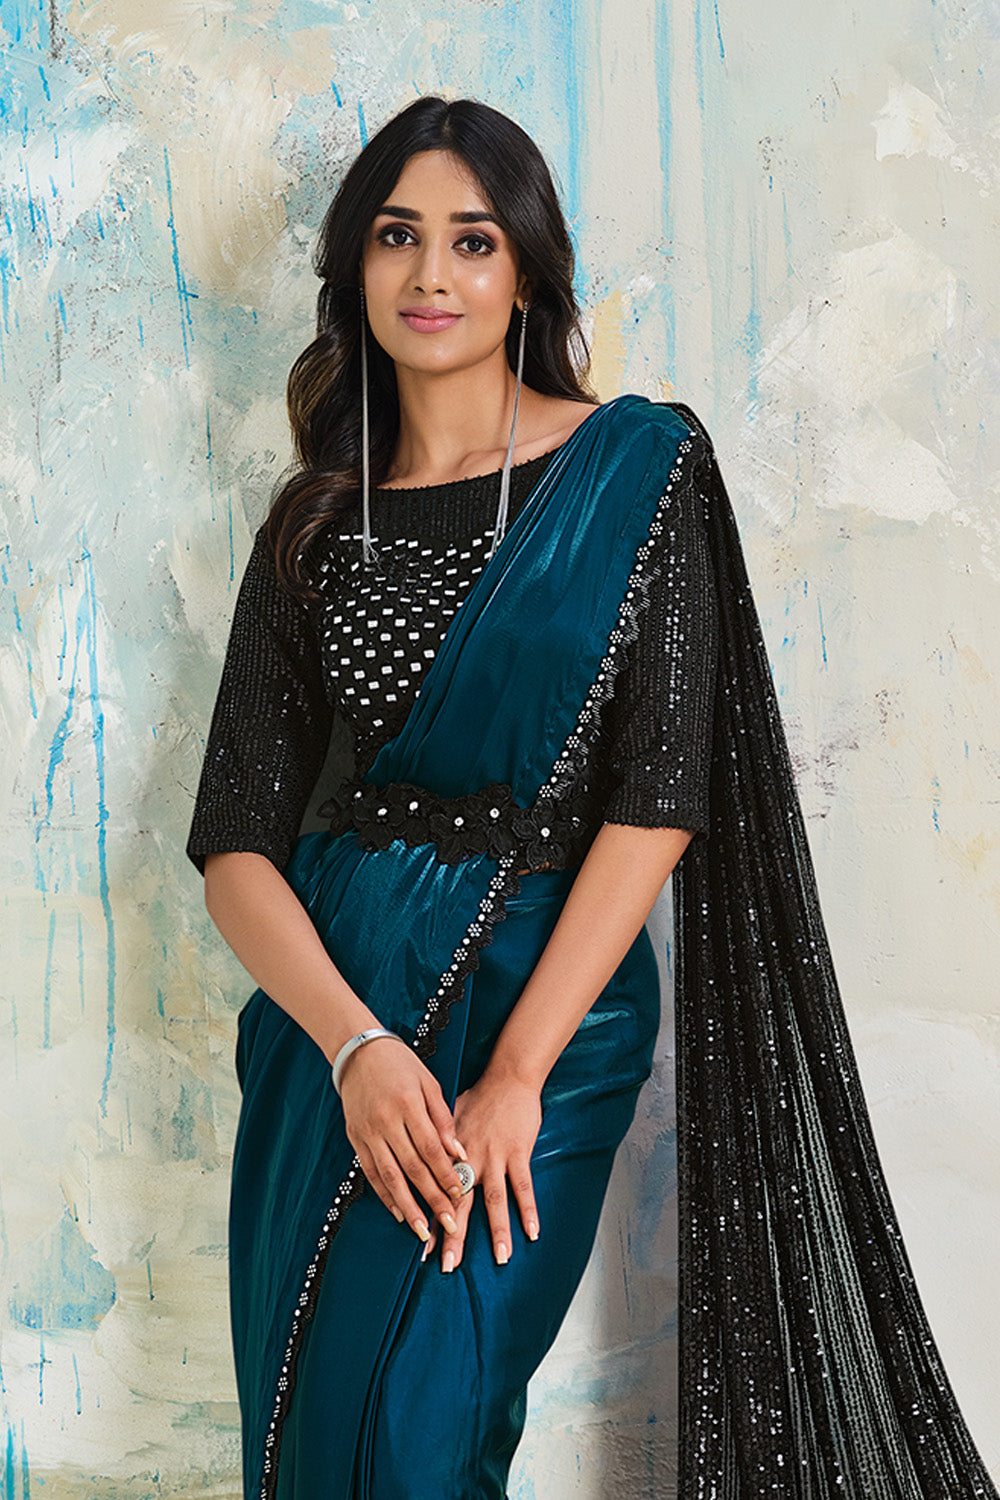 Teal Satin Crepe Saree With Stitched Blouse